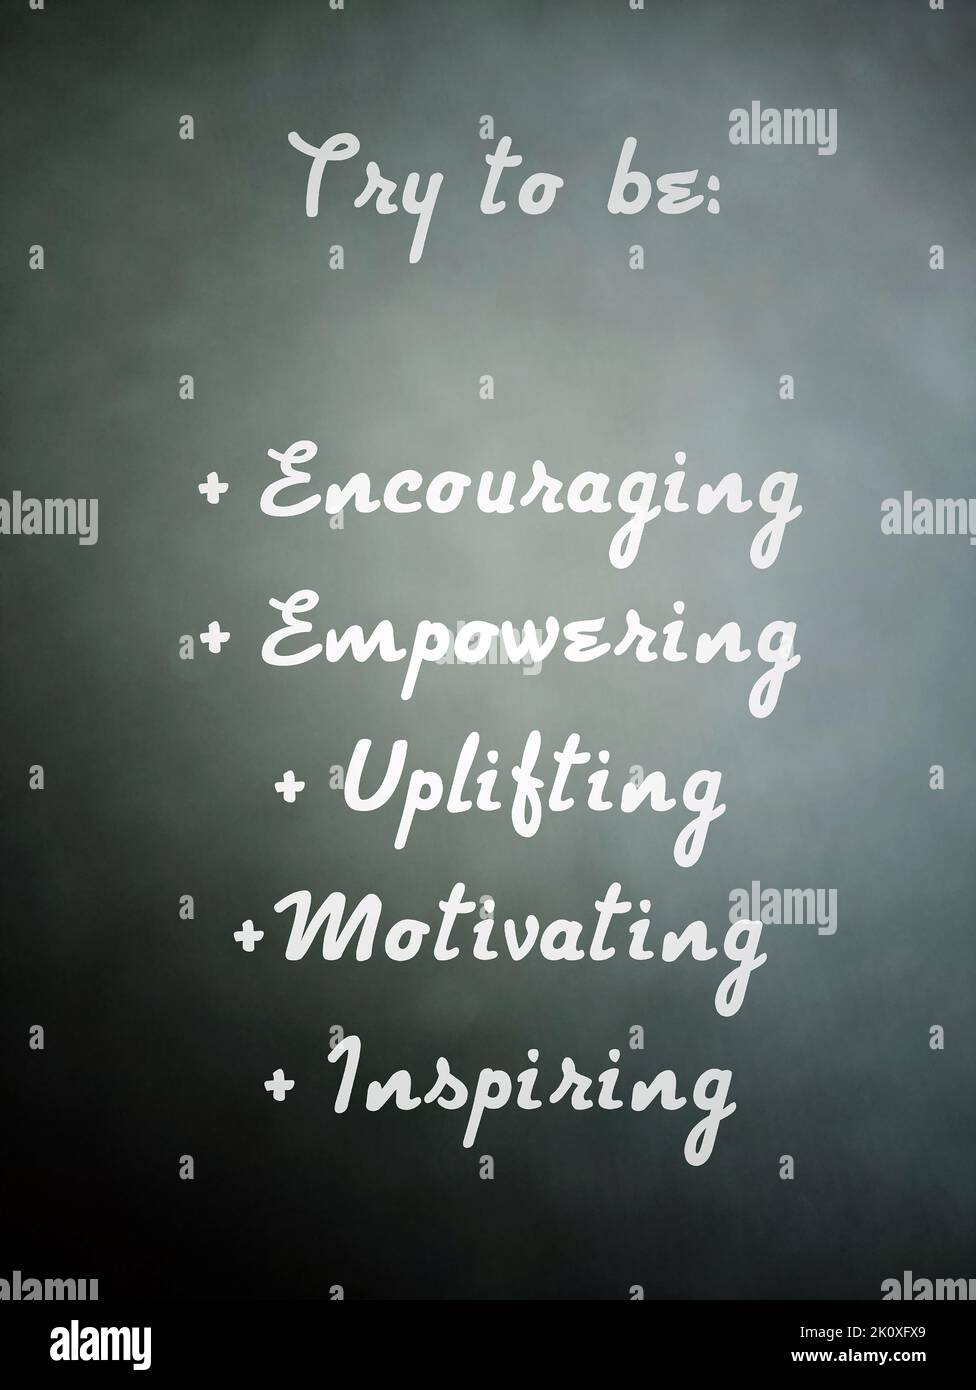 Positive text messages on light gray background - Try to be, encouraging empowering uplifting motivating inspiring. Stock Photo